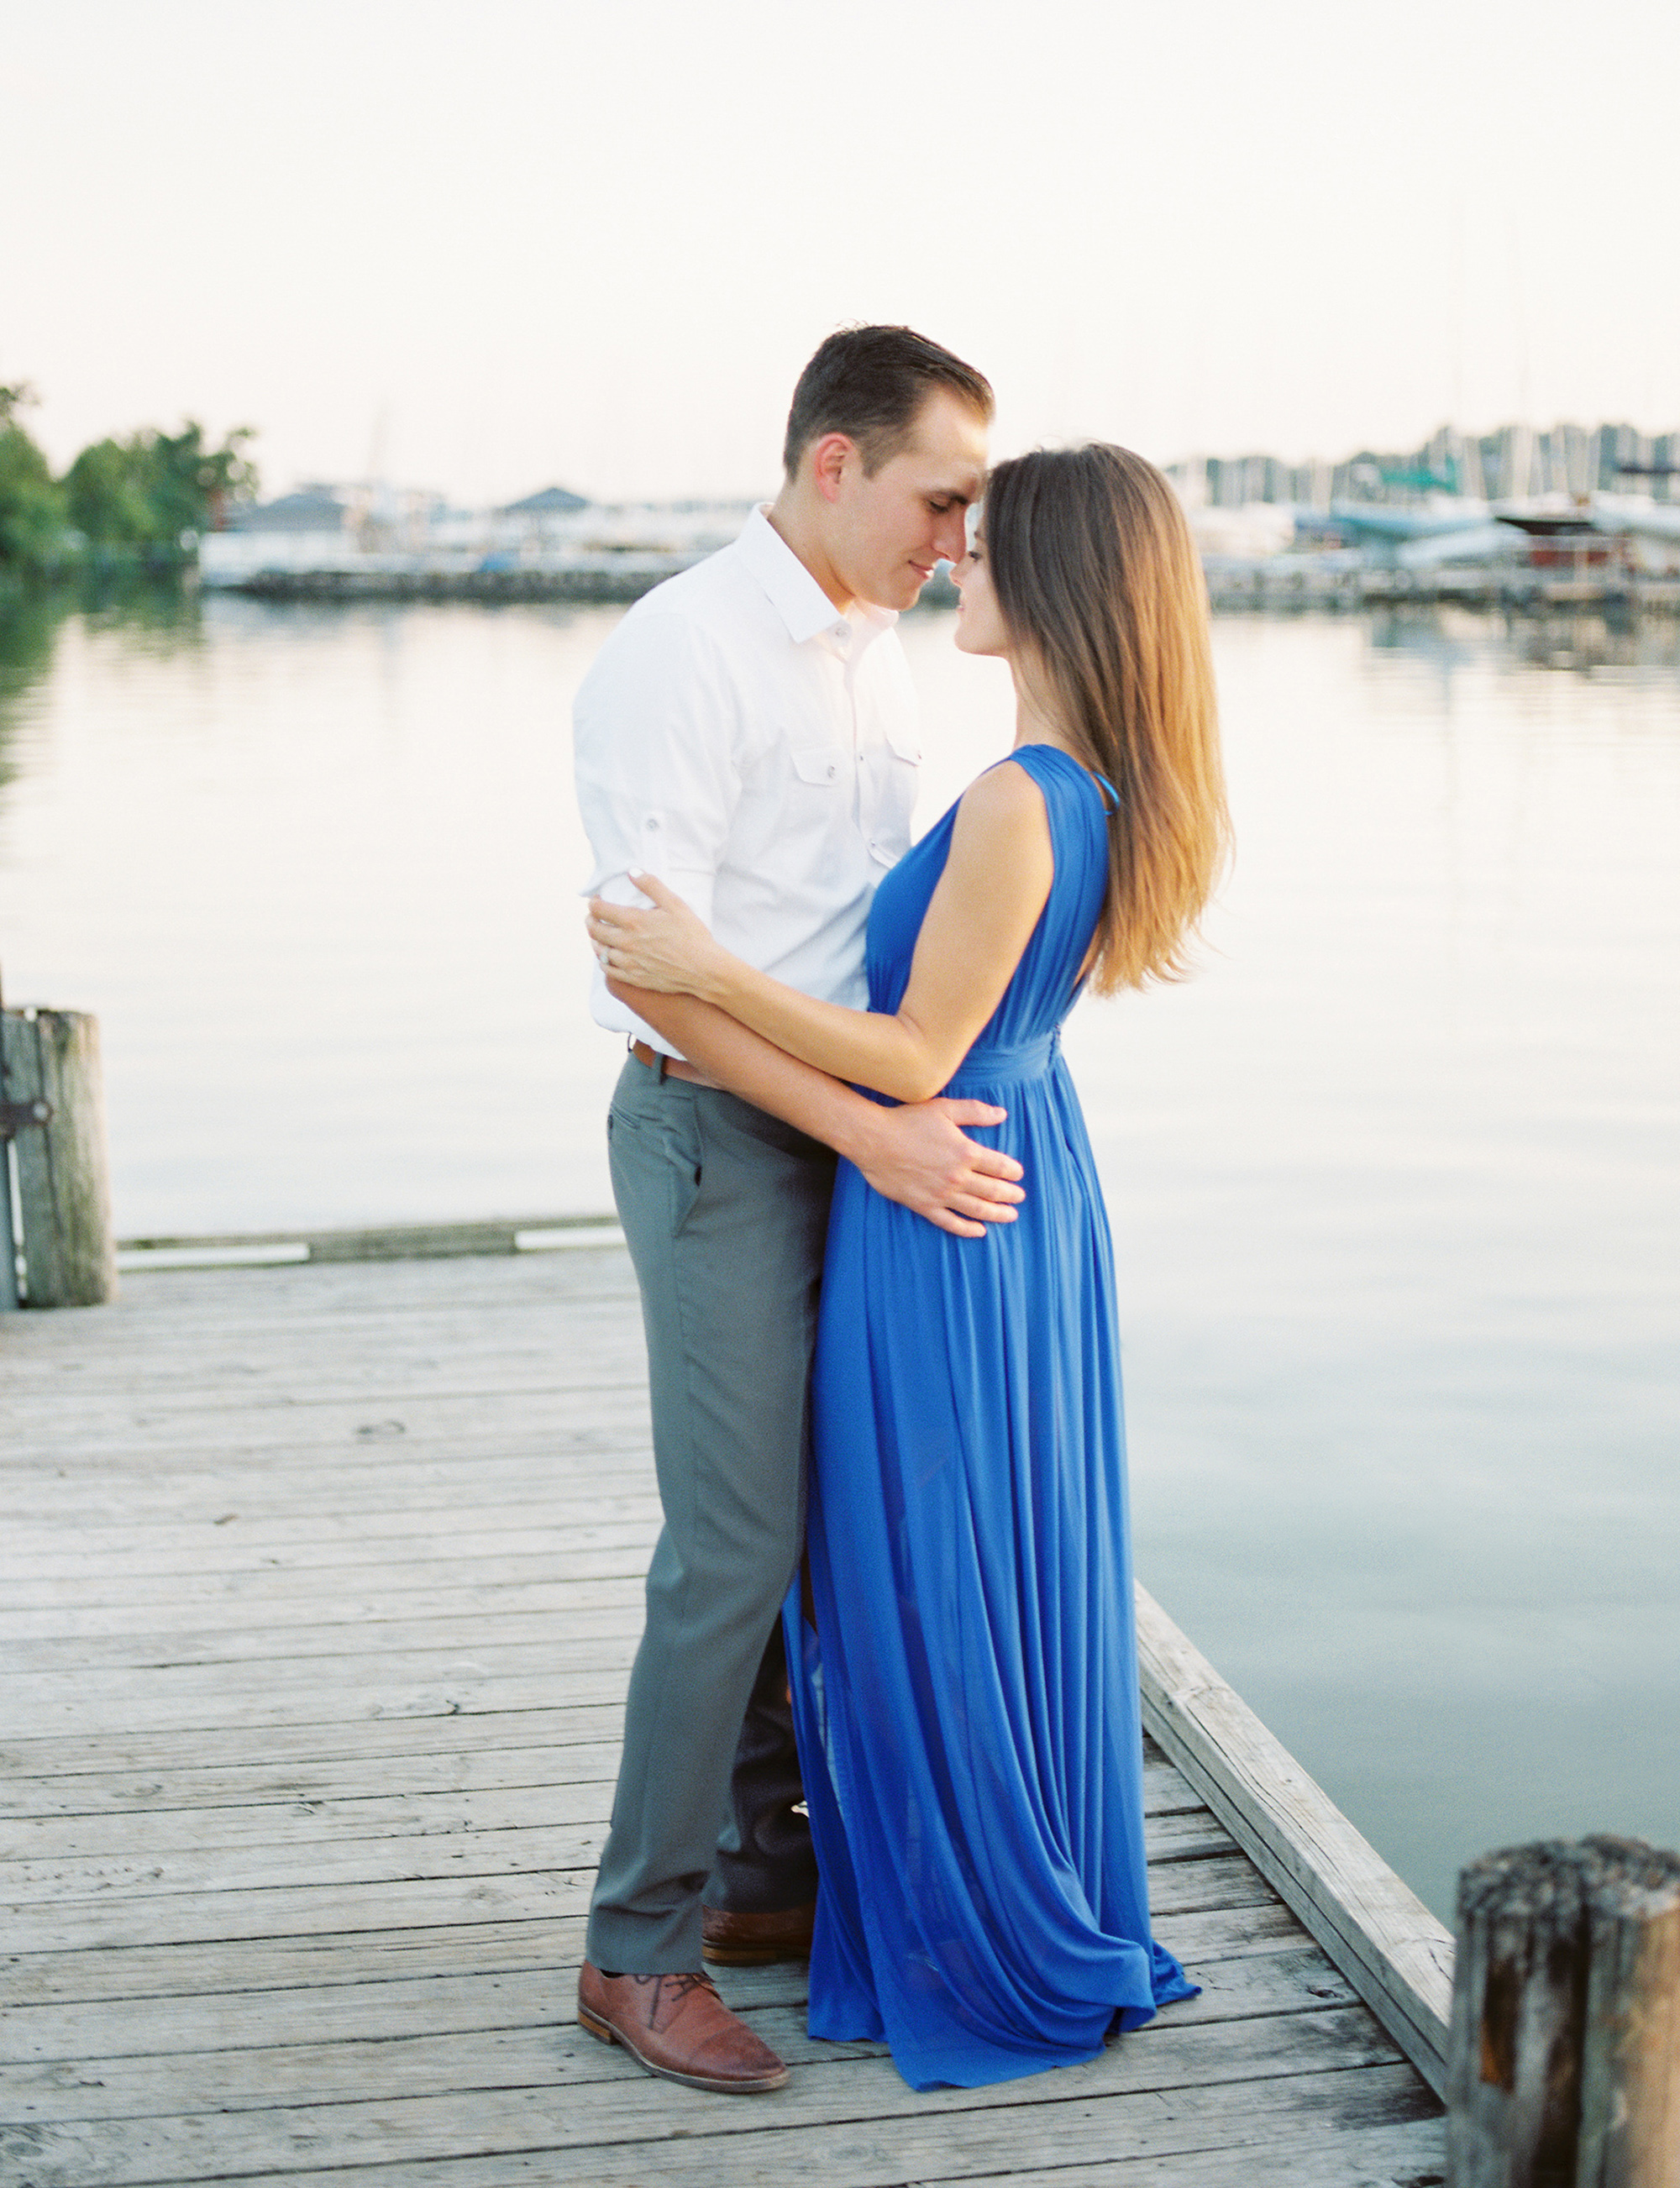 Nautical inspired engagement session in Dallas.